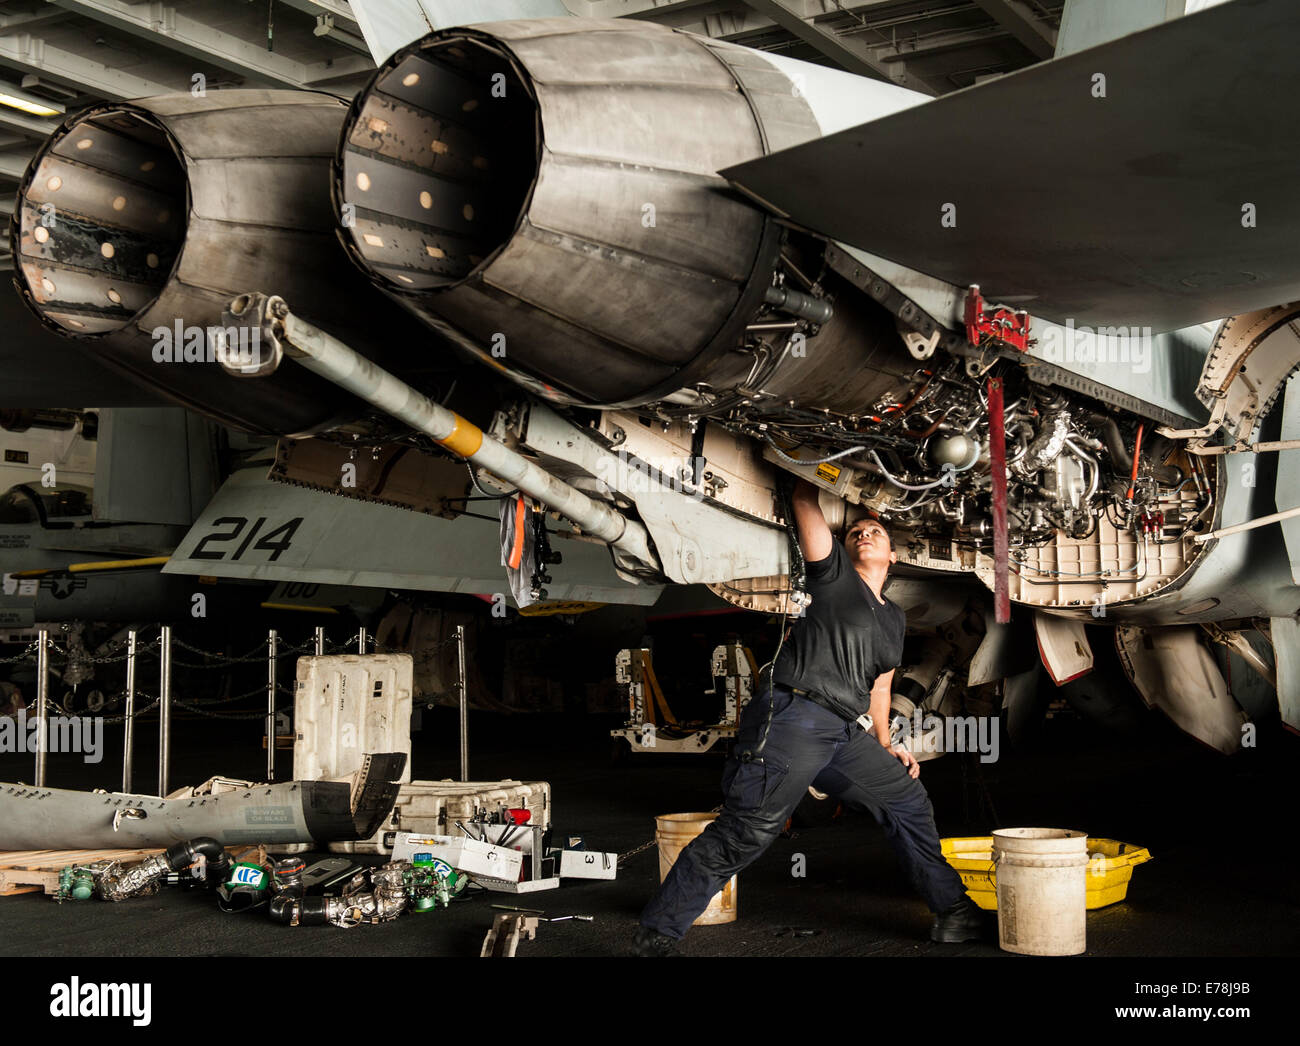 U.S. Navy Aviation Machinist's Mate 2nd Class Alexandra Mimbela performs maintenance on an F/A-18F Super Hornet aircraft assigned to Strike Fighter Squadron (VFA) 213 aboard the aircraft carrier USS George H.W. Bush (CVN 77) Aug. 21, 2014, in the Persian Stock Photo